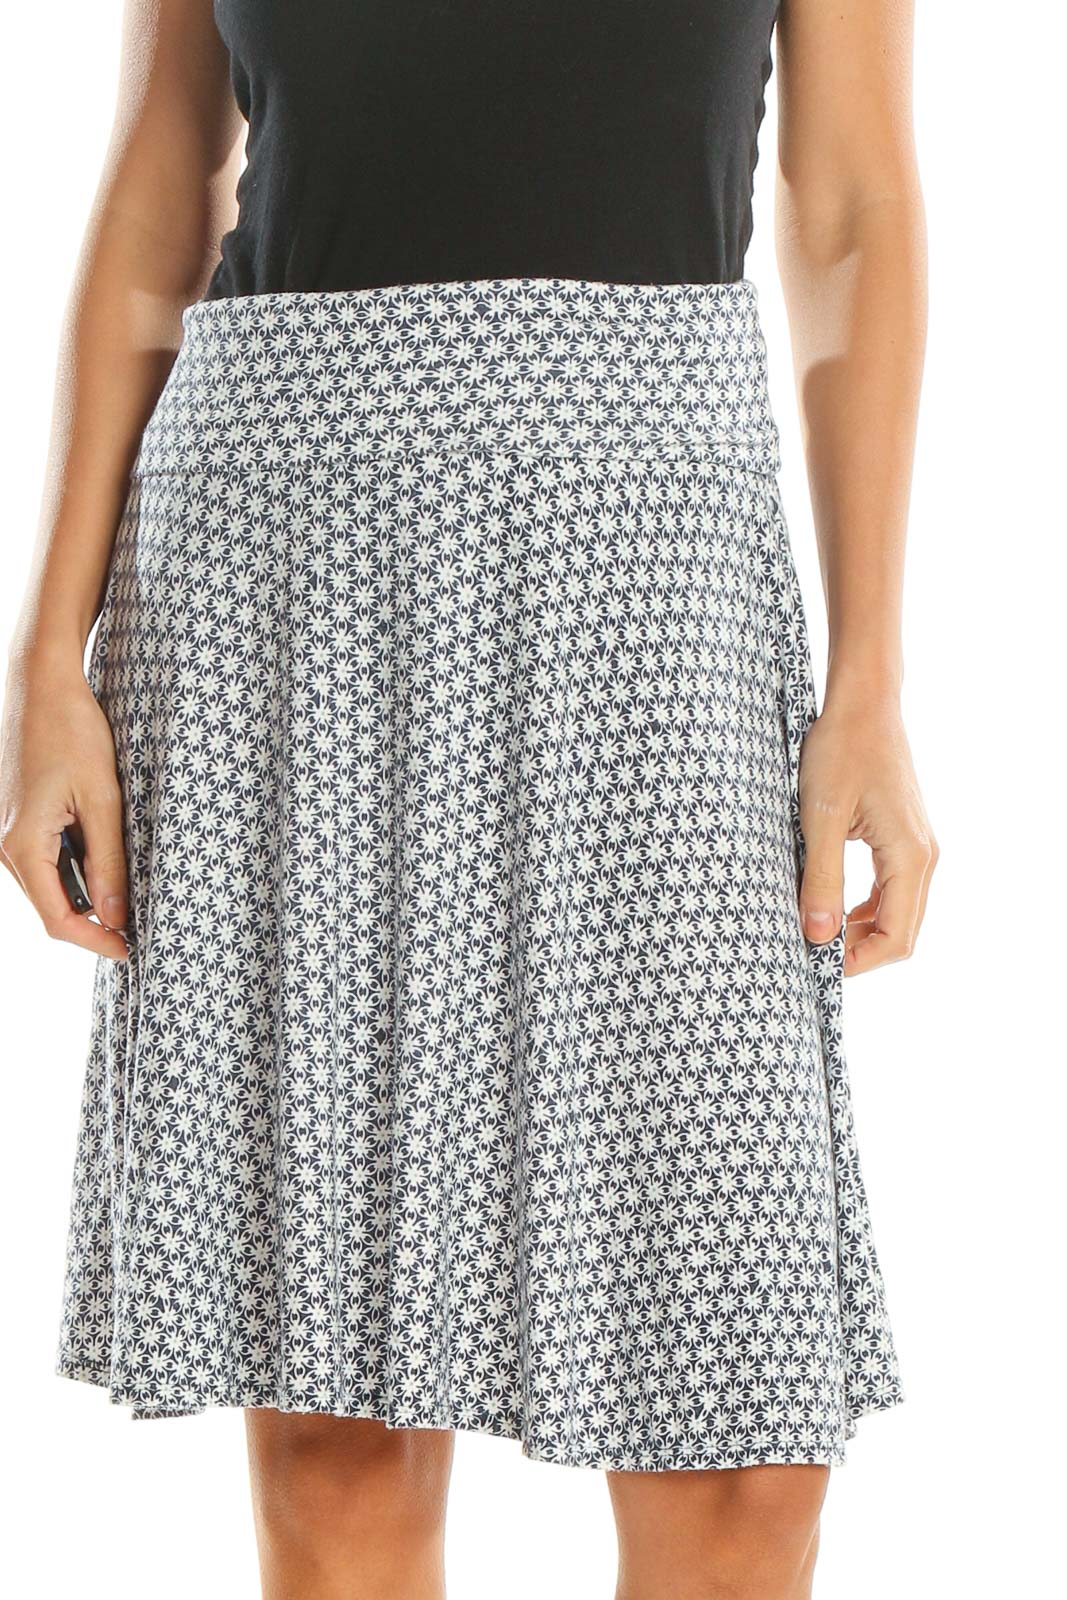 White Printed Casual A-Line Skirt Front